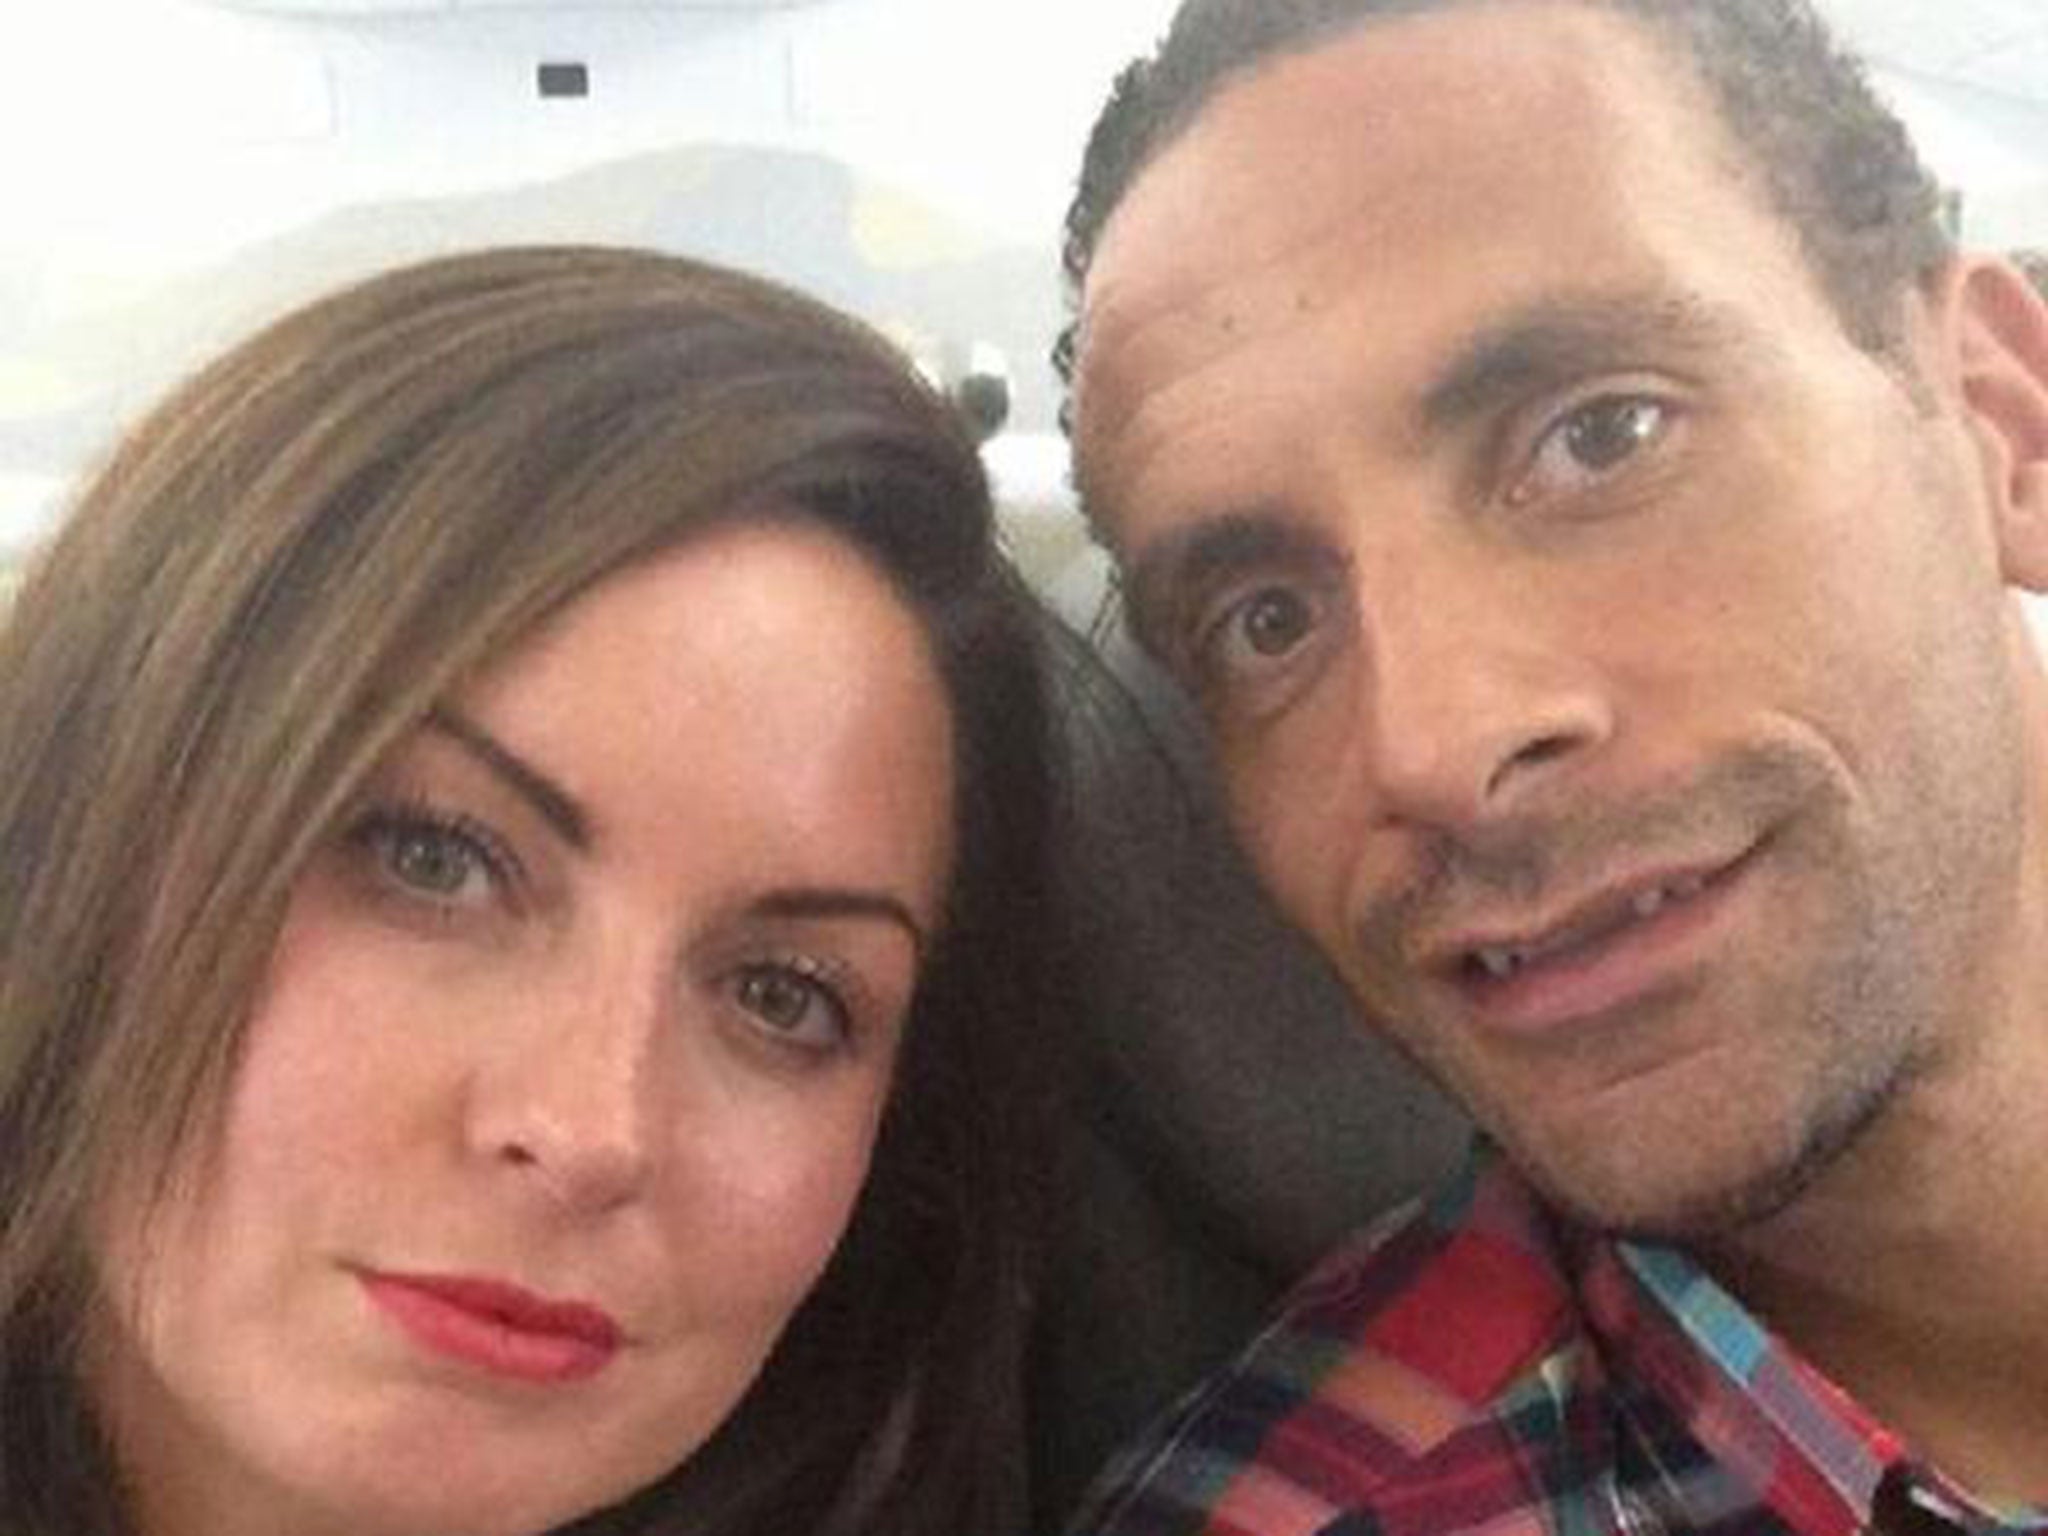 Rebecca Ellison, wife of footballer Rio Ferdinand, has died after a short battle with cancer